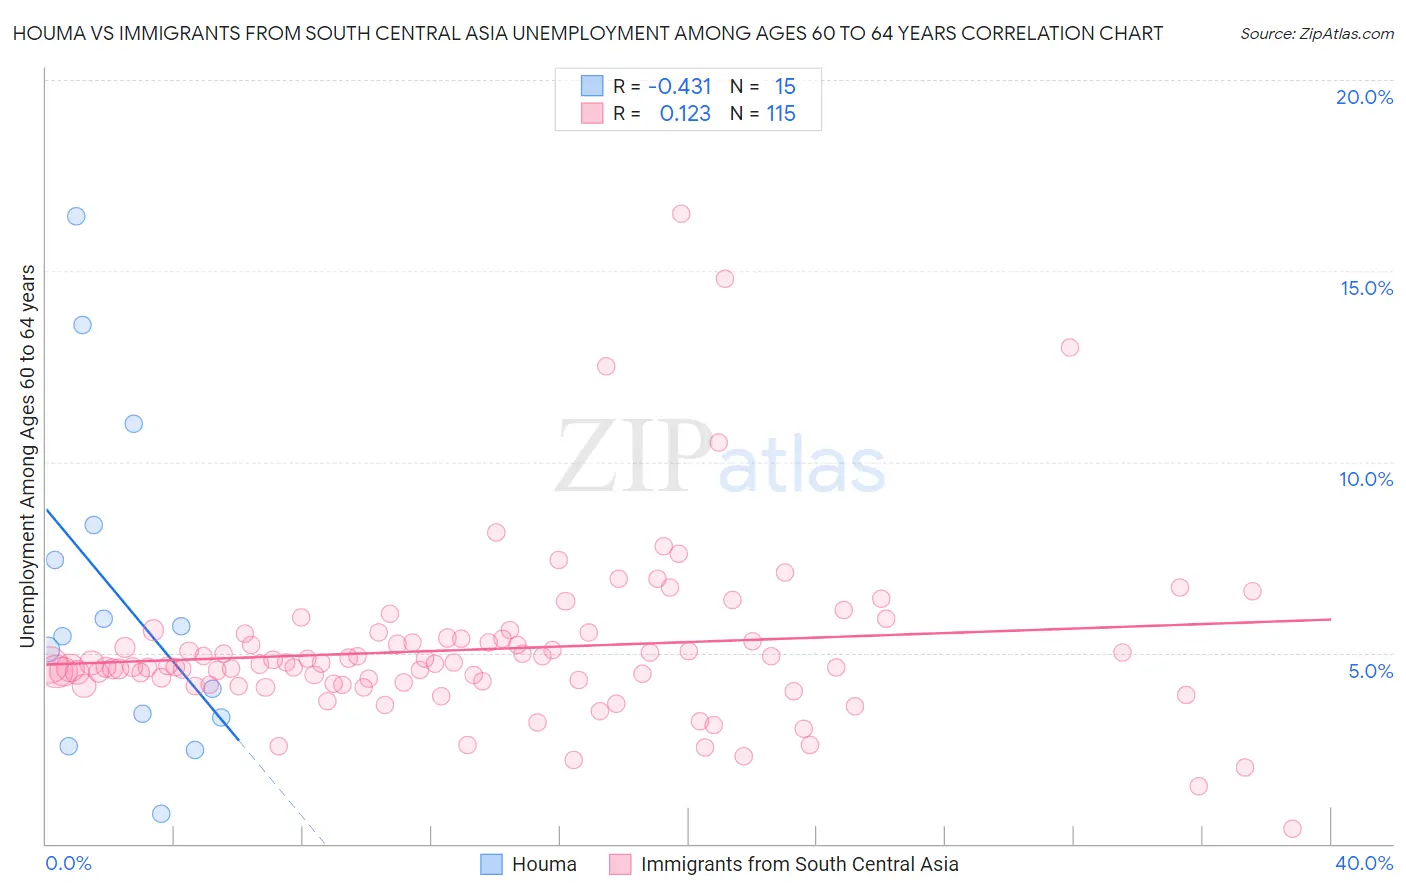 Houma vs Immigrants from South Central Asia Unemployment Among Ages 60 to 64 years